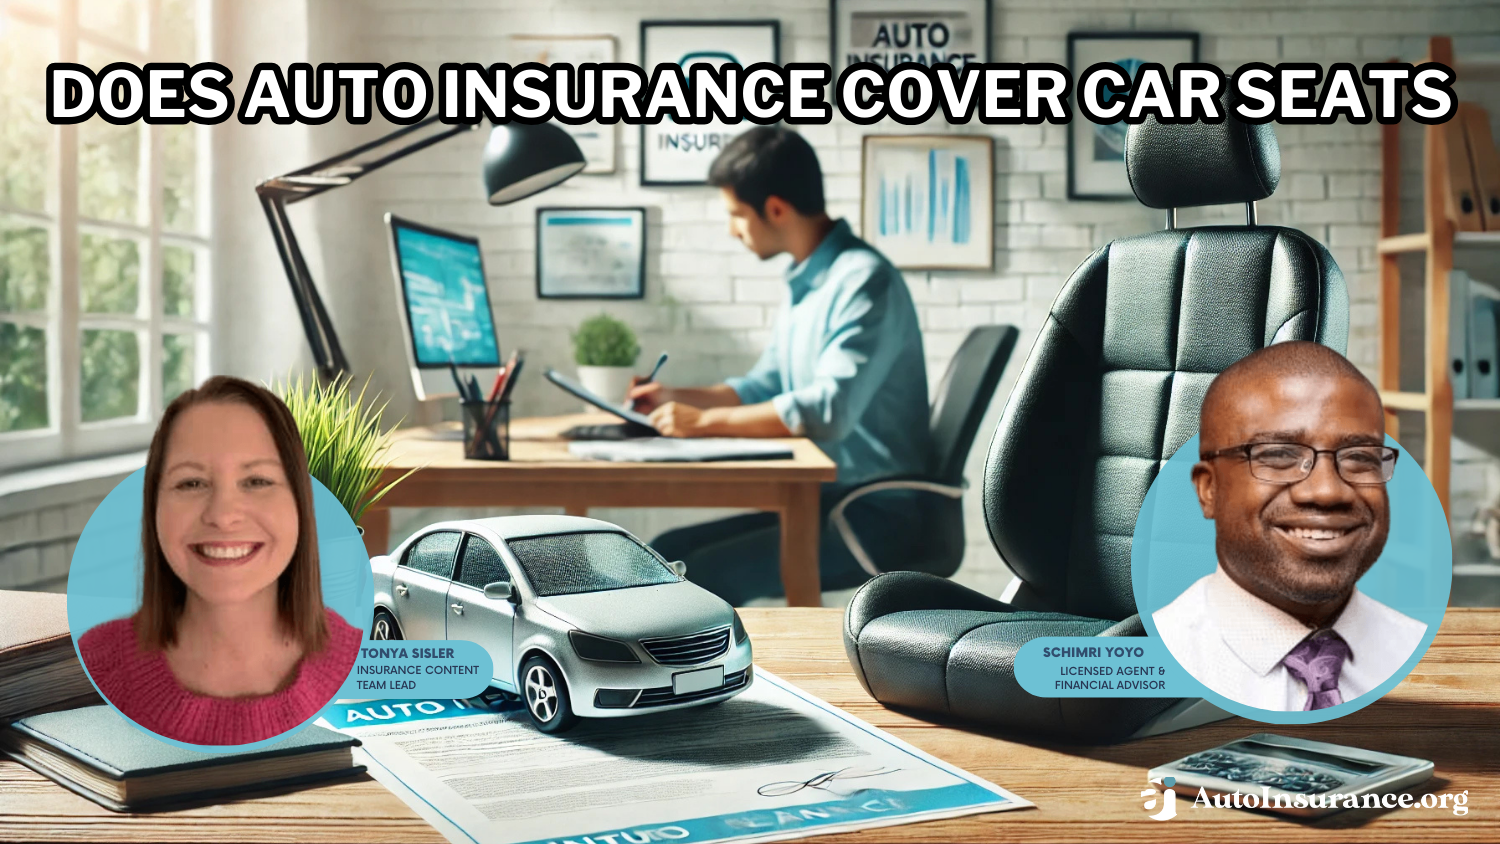 Does auto insurance cover car seats?